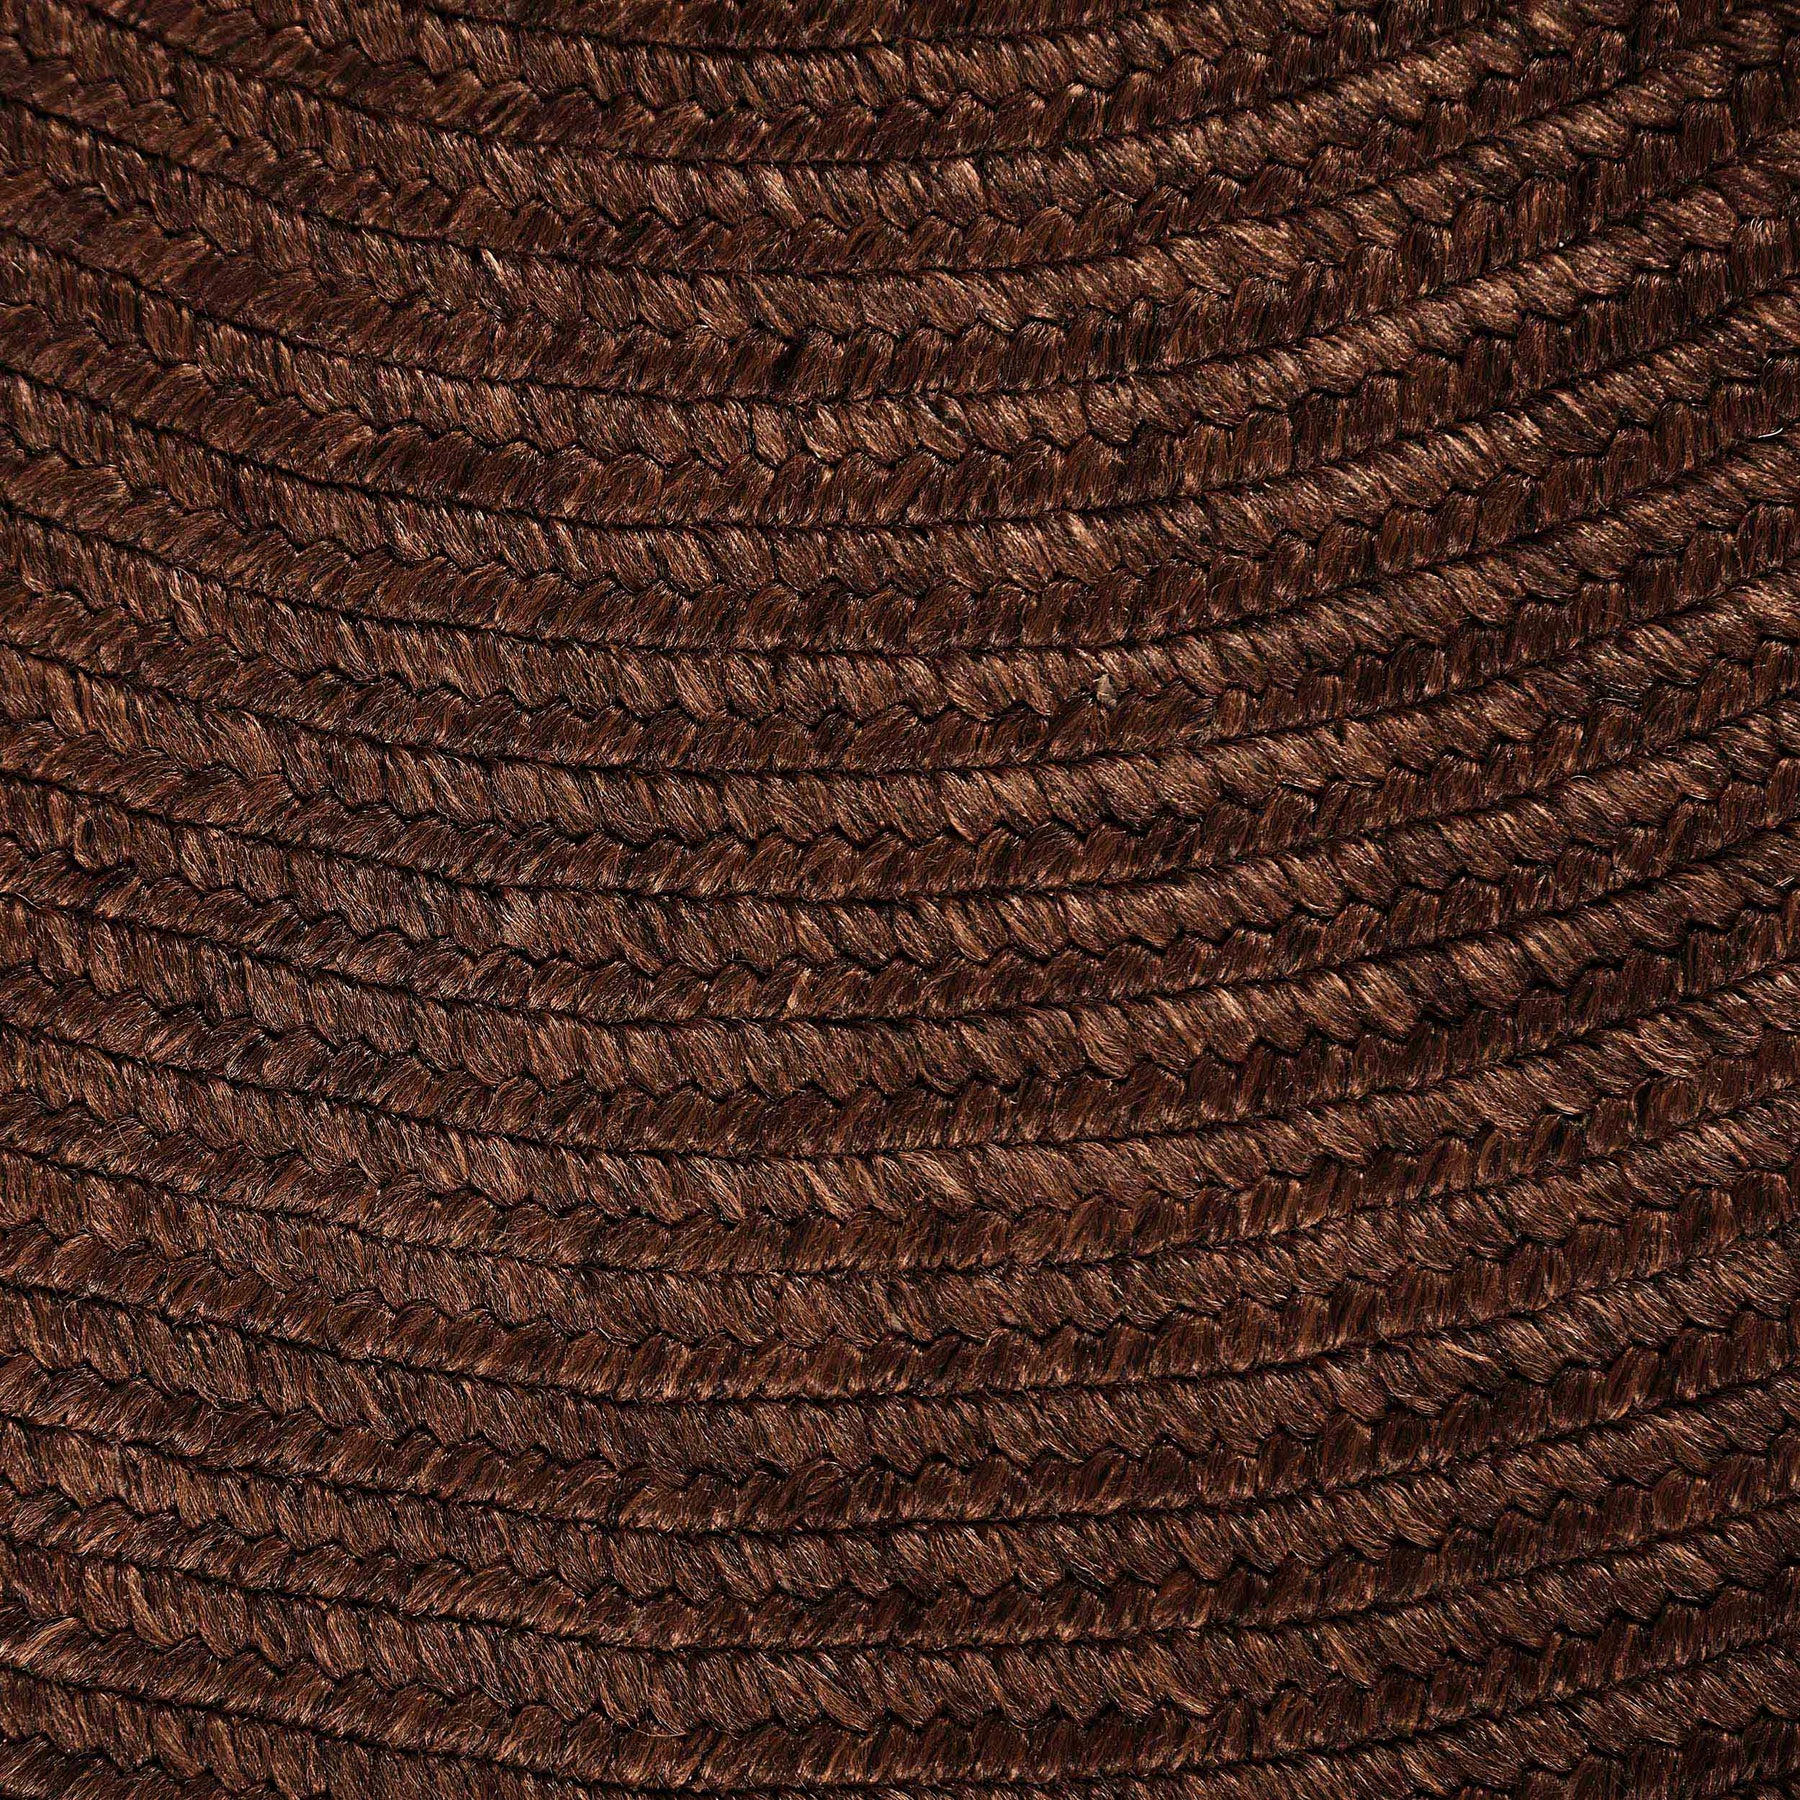 Classic Braided Weave Oval Area Rug Indoor Outdoor Rugs - Cocoa